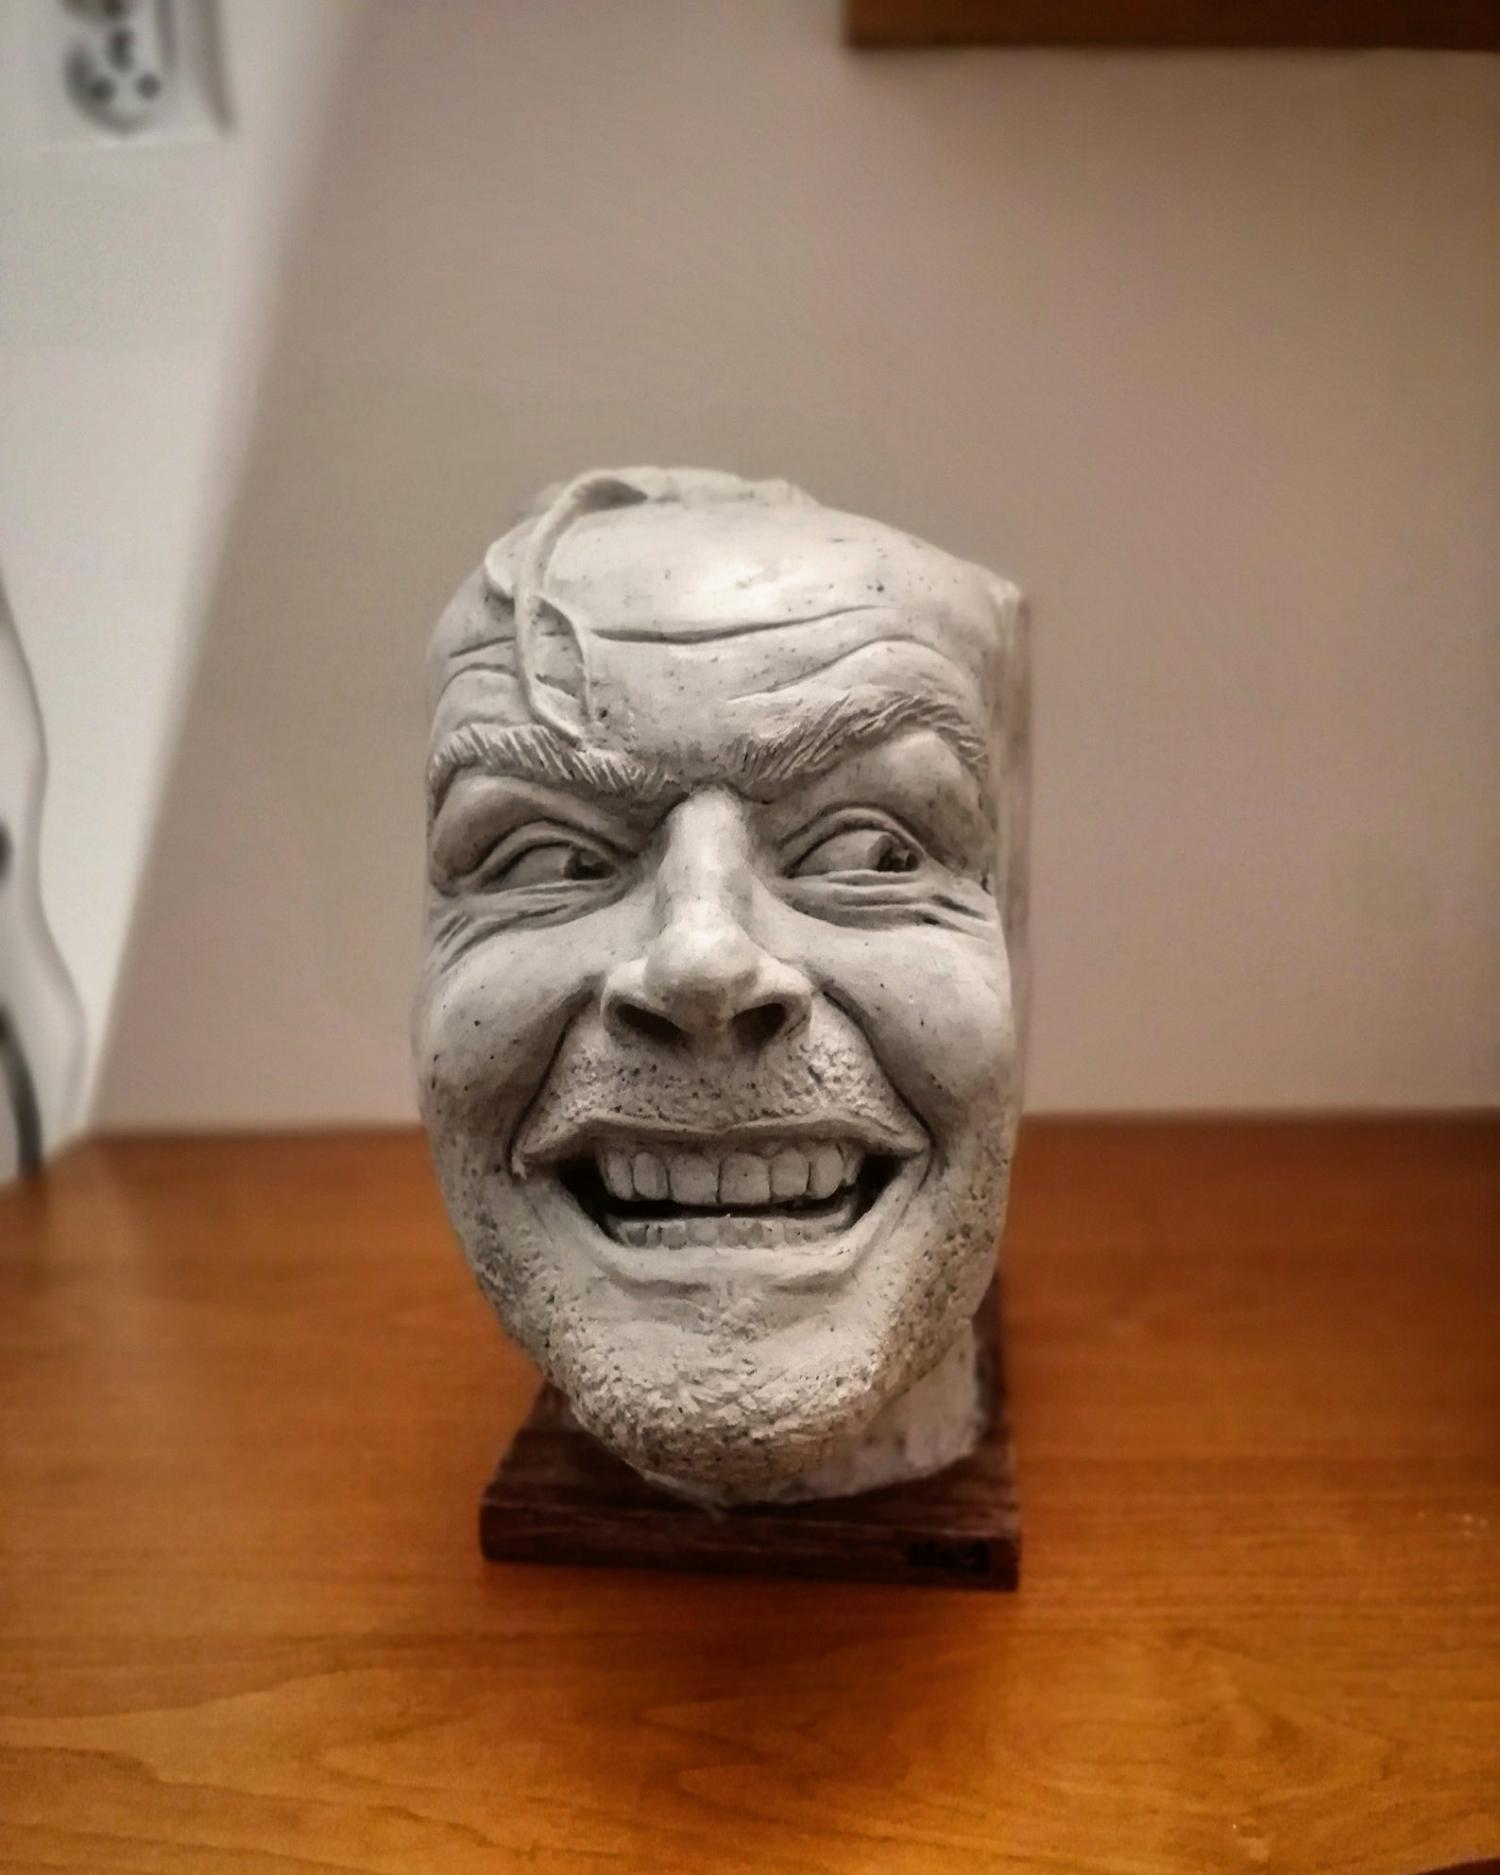 Jack Nicholson  Here's Johnny The Shining Bookend